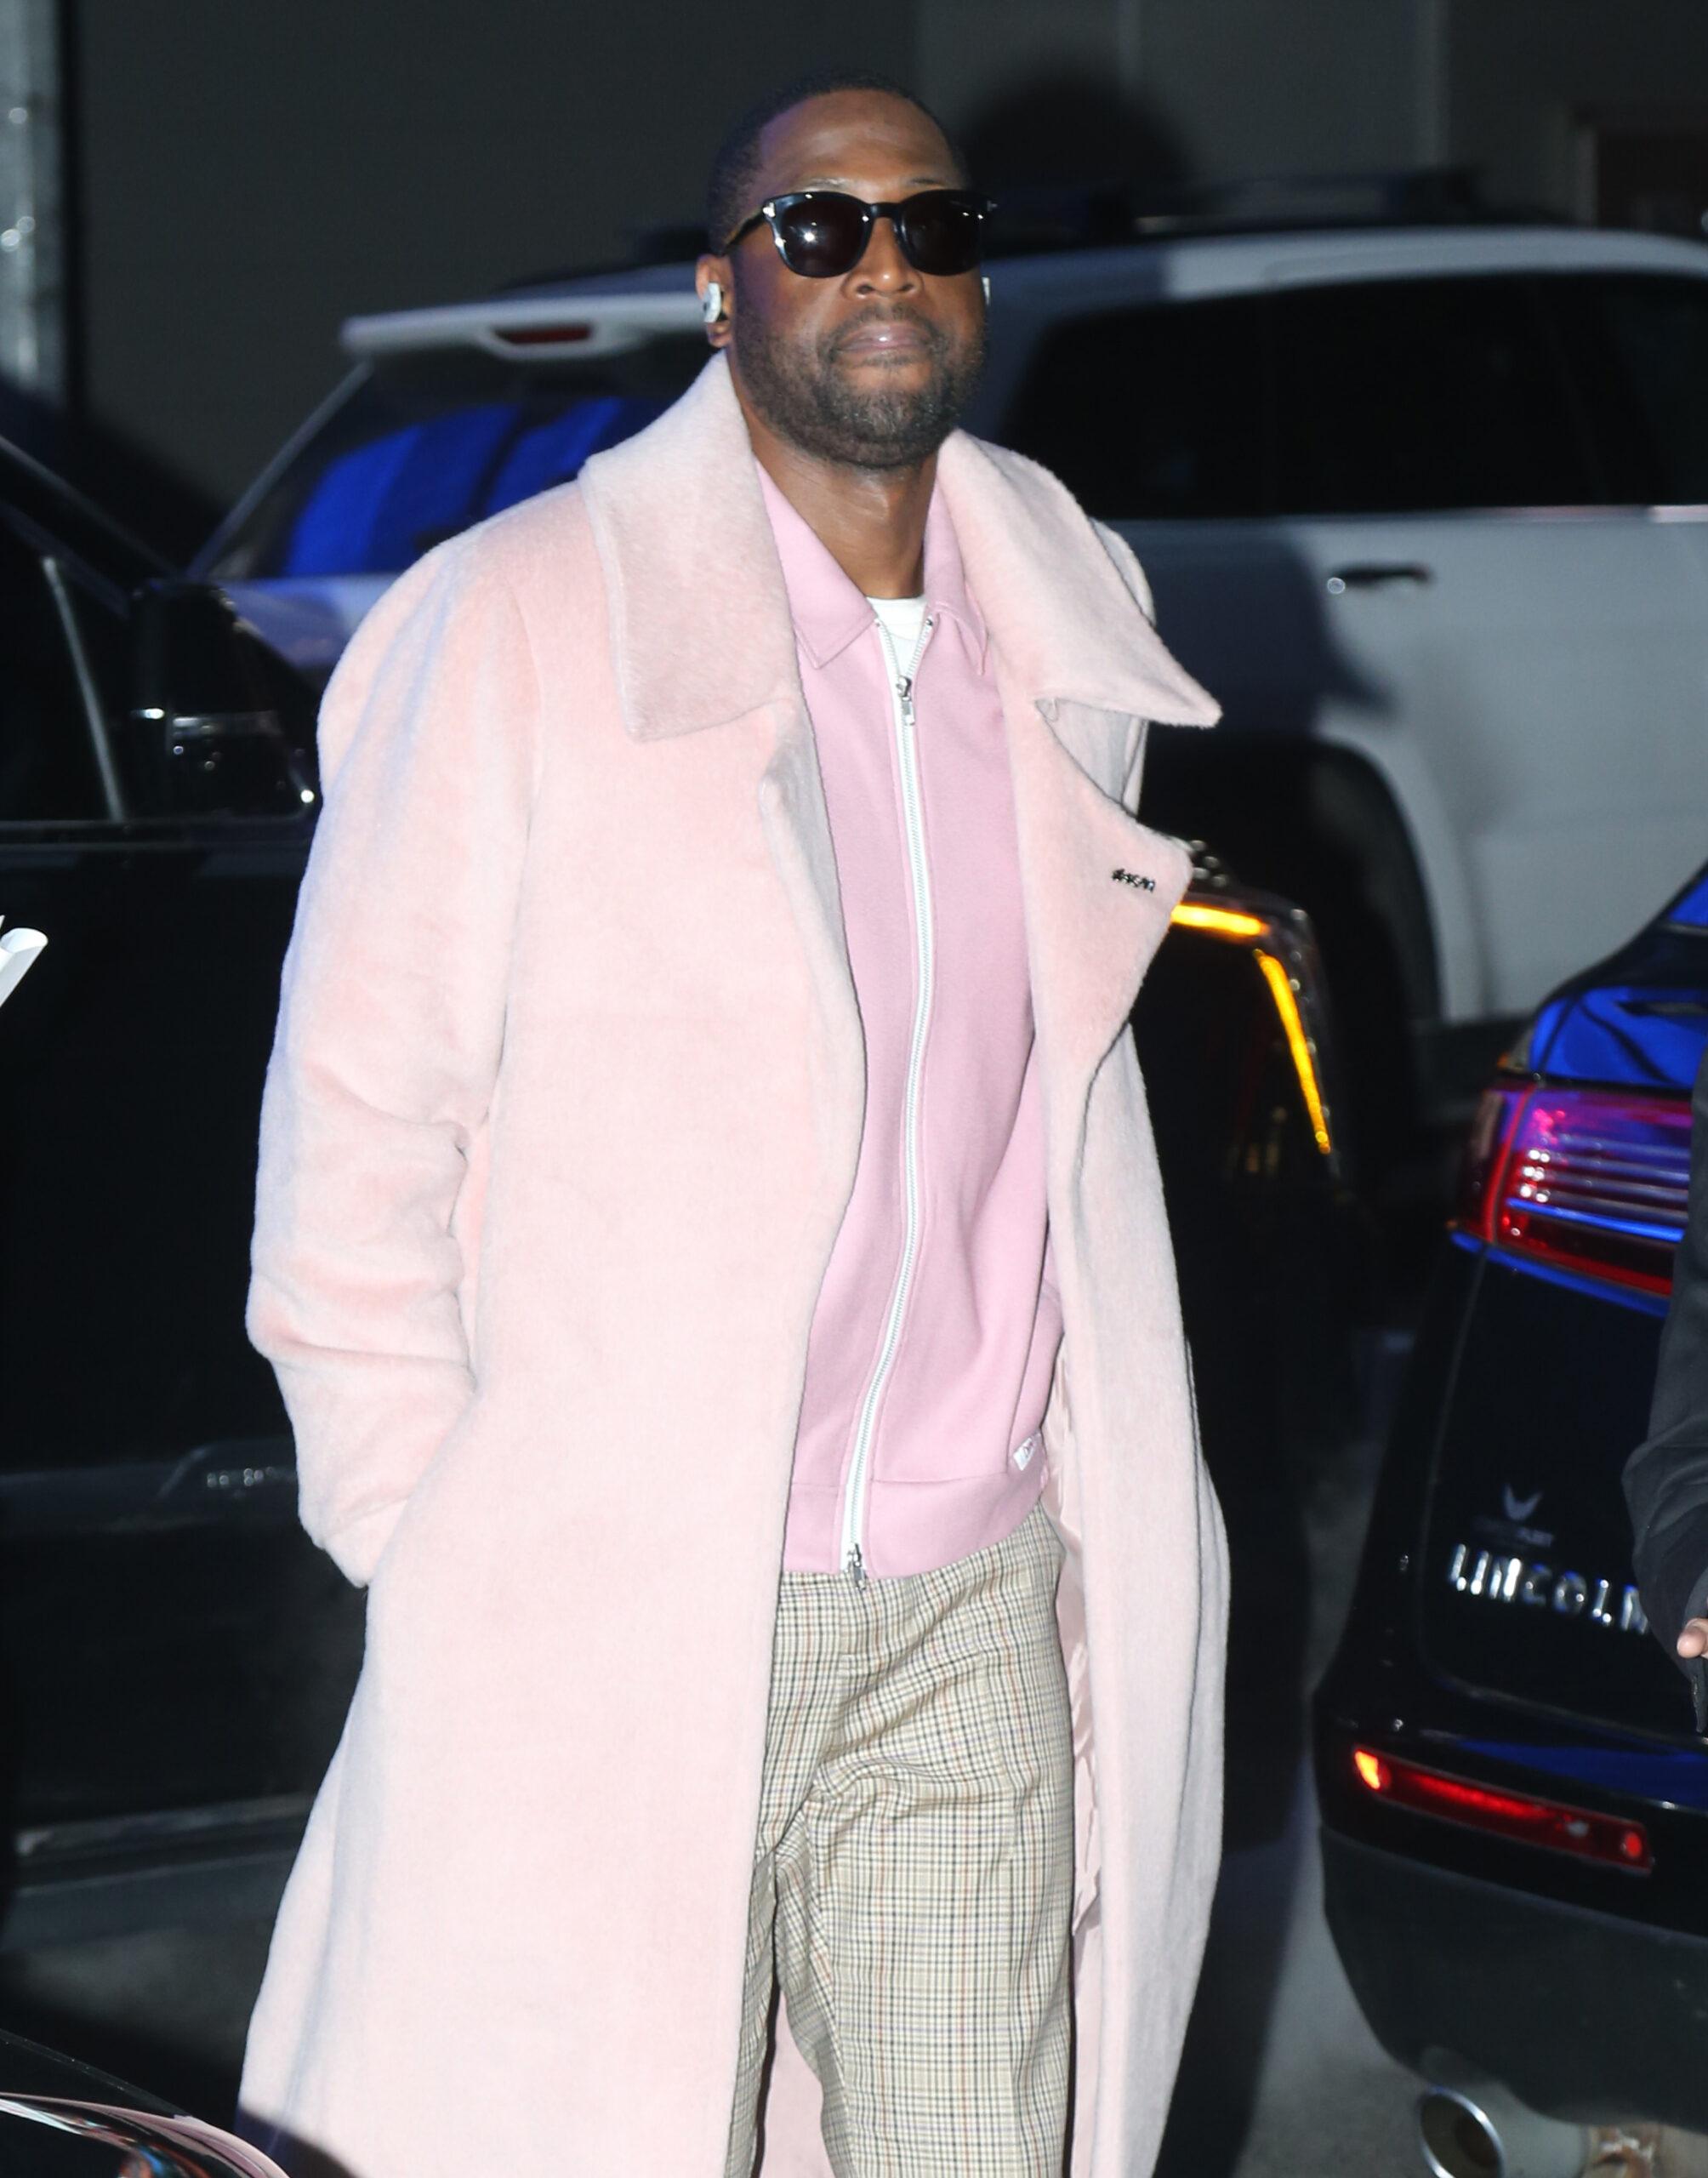 Dwayne Wade coming out of GMA in New York City